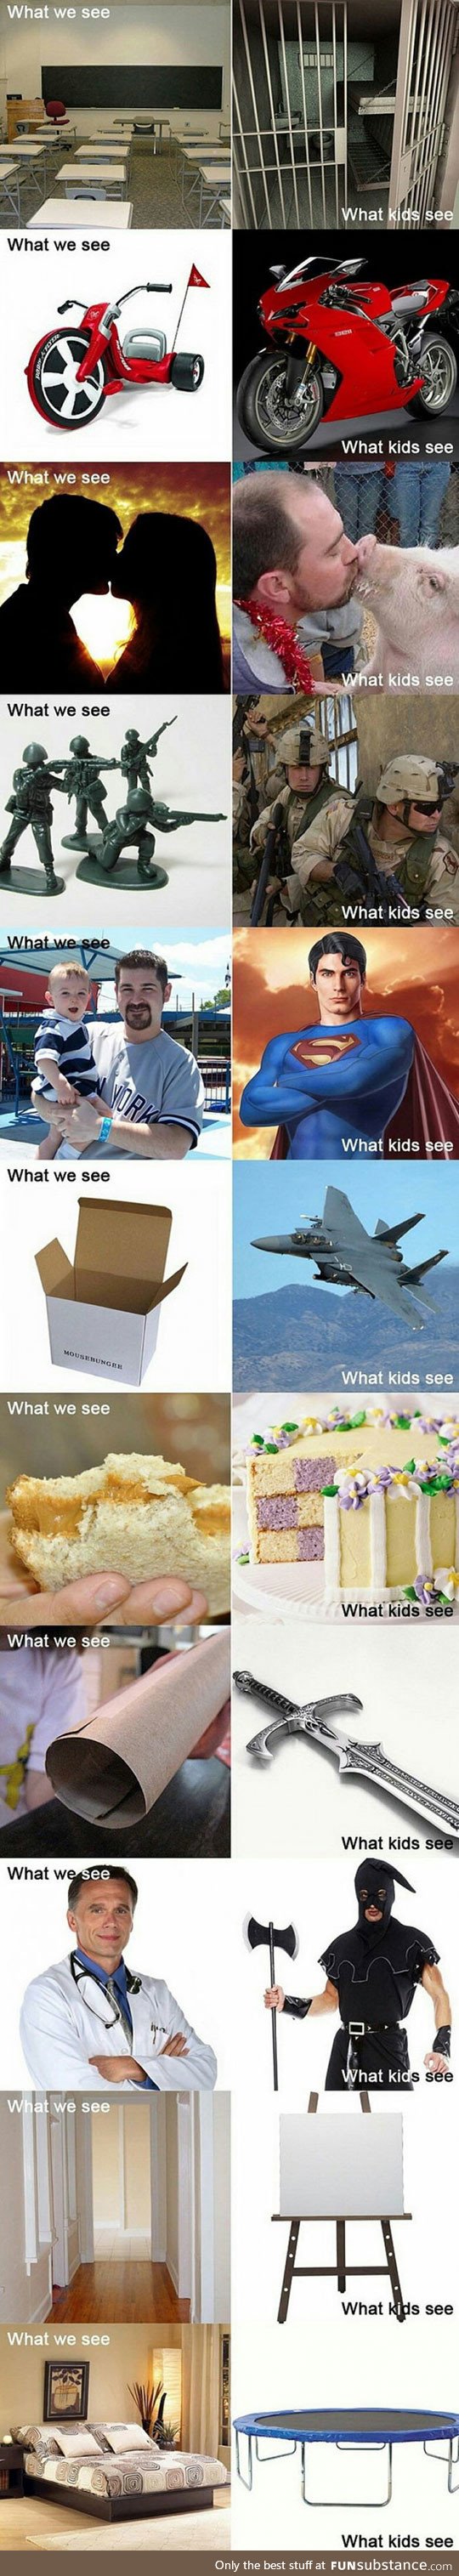 What kids really see